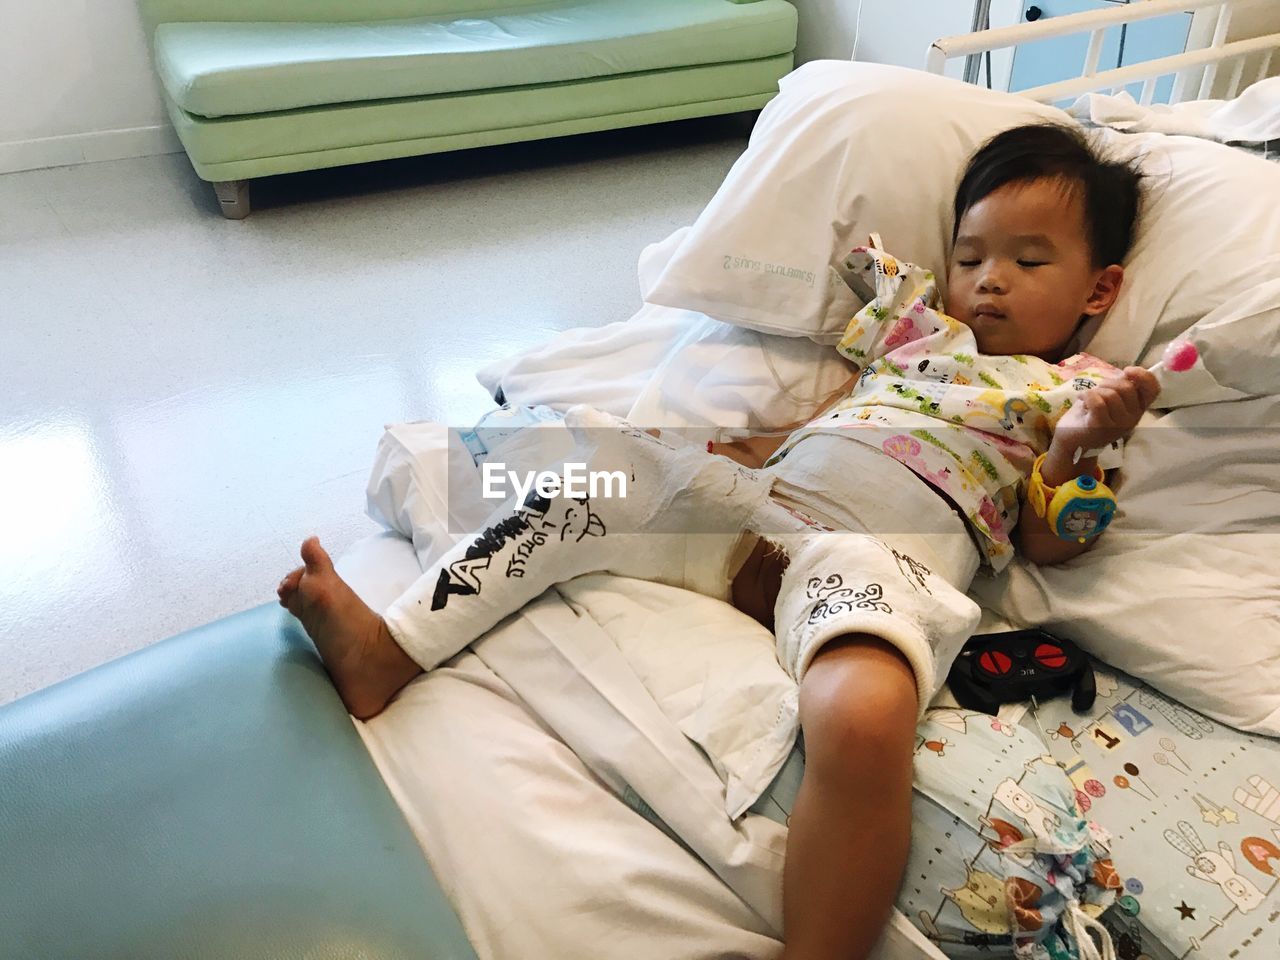 Young boy with leg cast in hospital bed